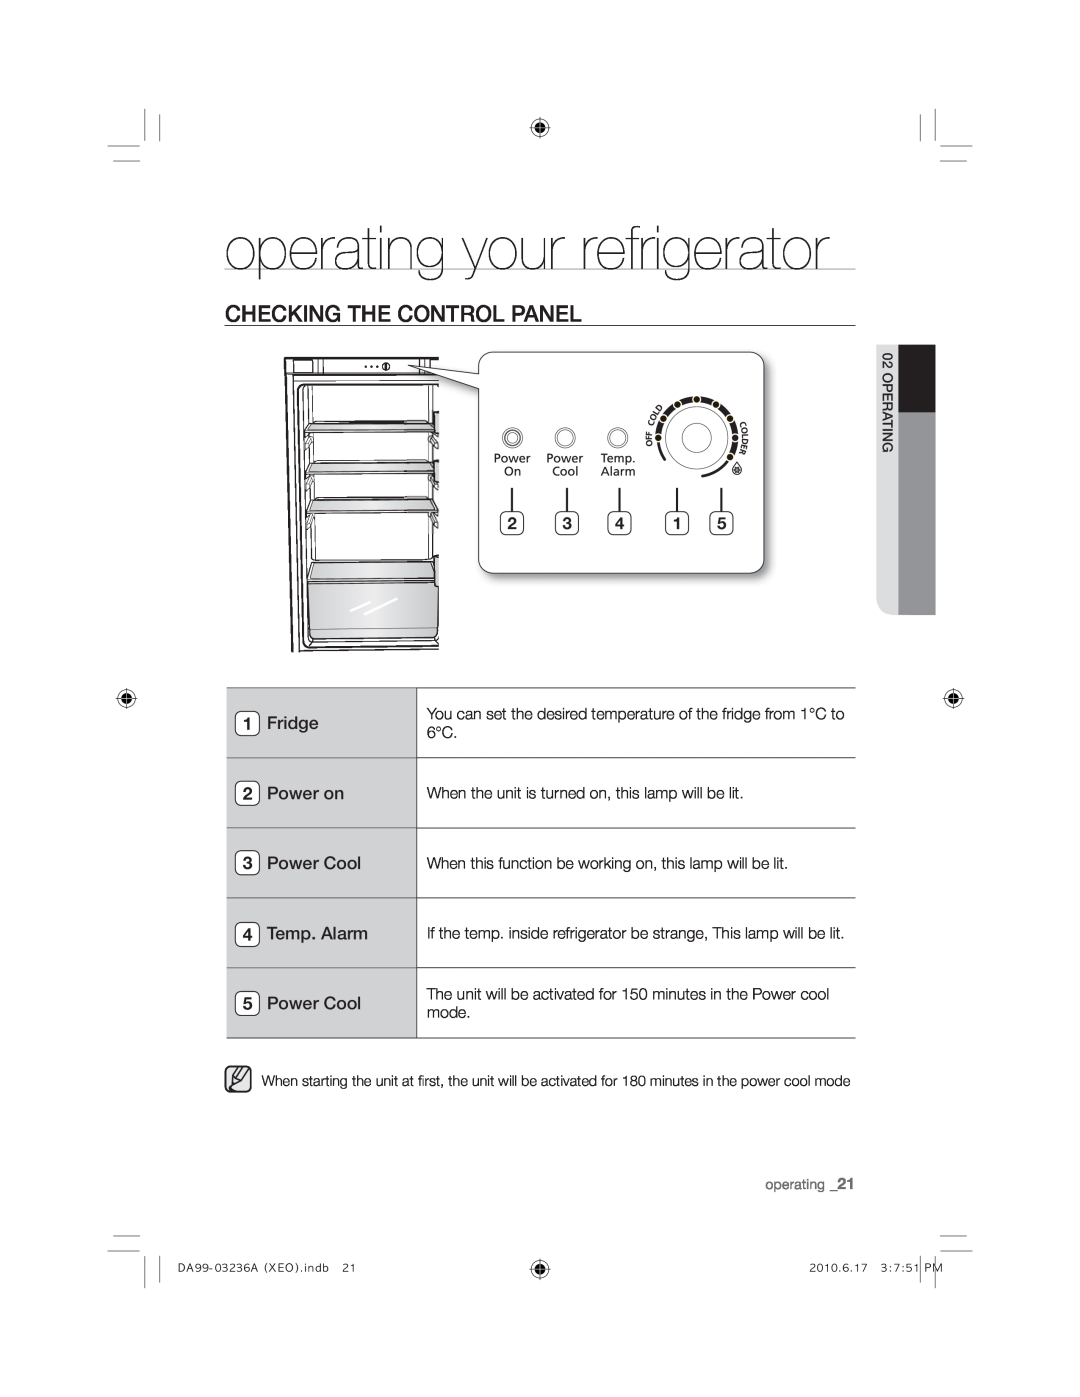 Samsung RL39TRCSW1/XEF operating your refrigerator, Checking The Control Panel, 2 3 4 1, Fridge, Power on, Power Cool 